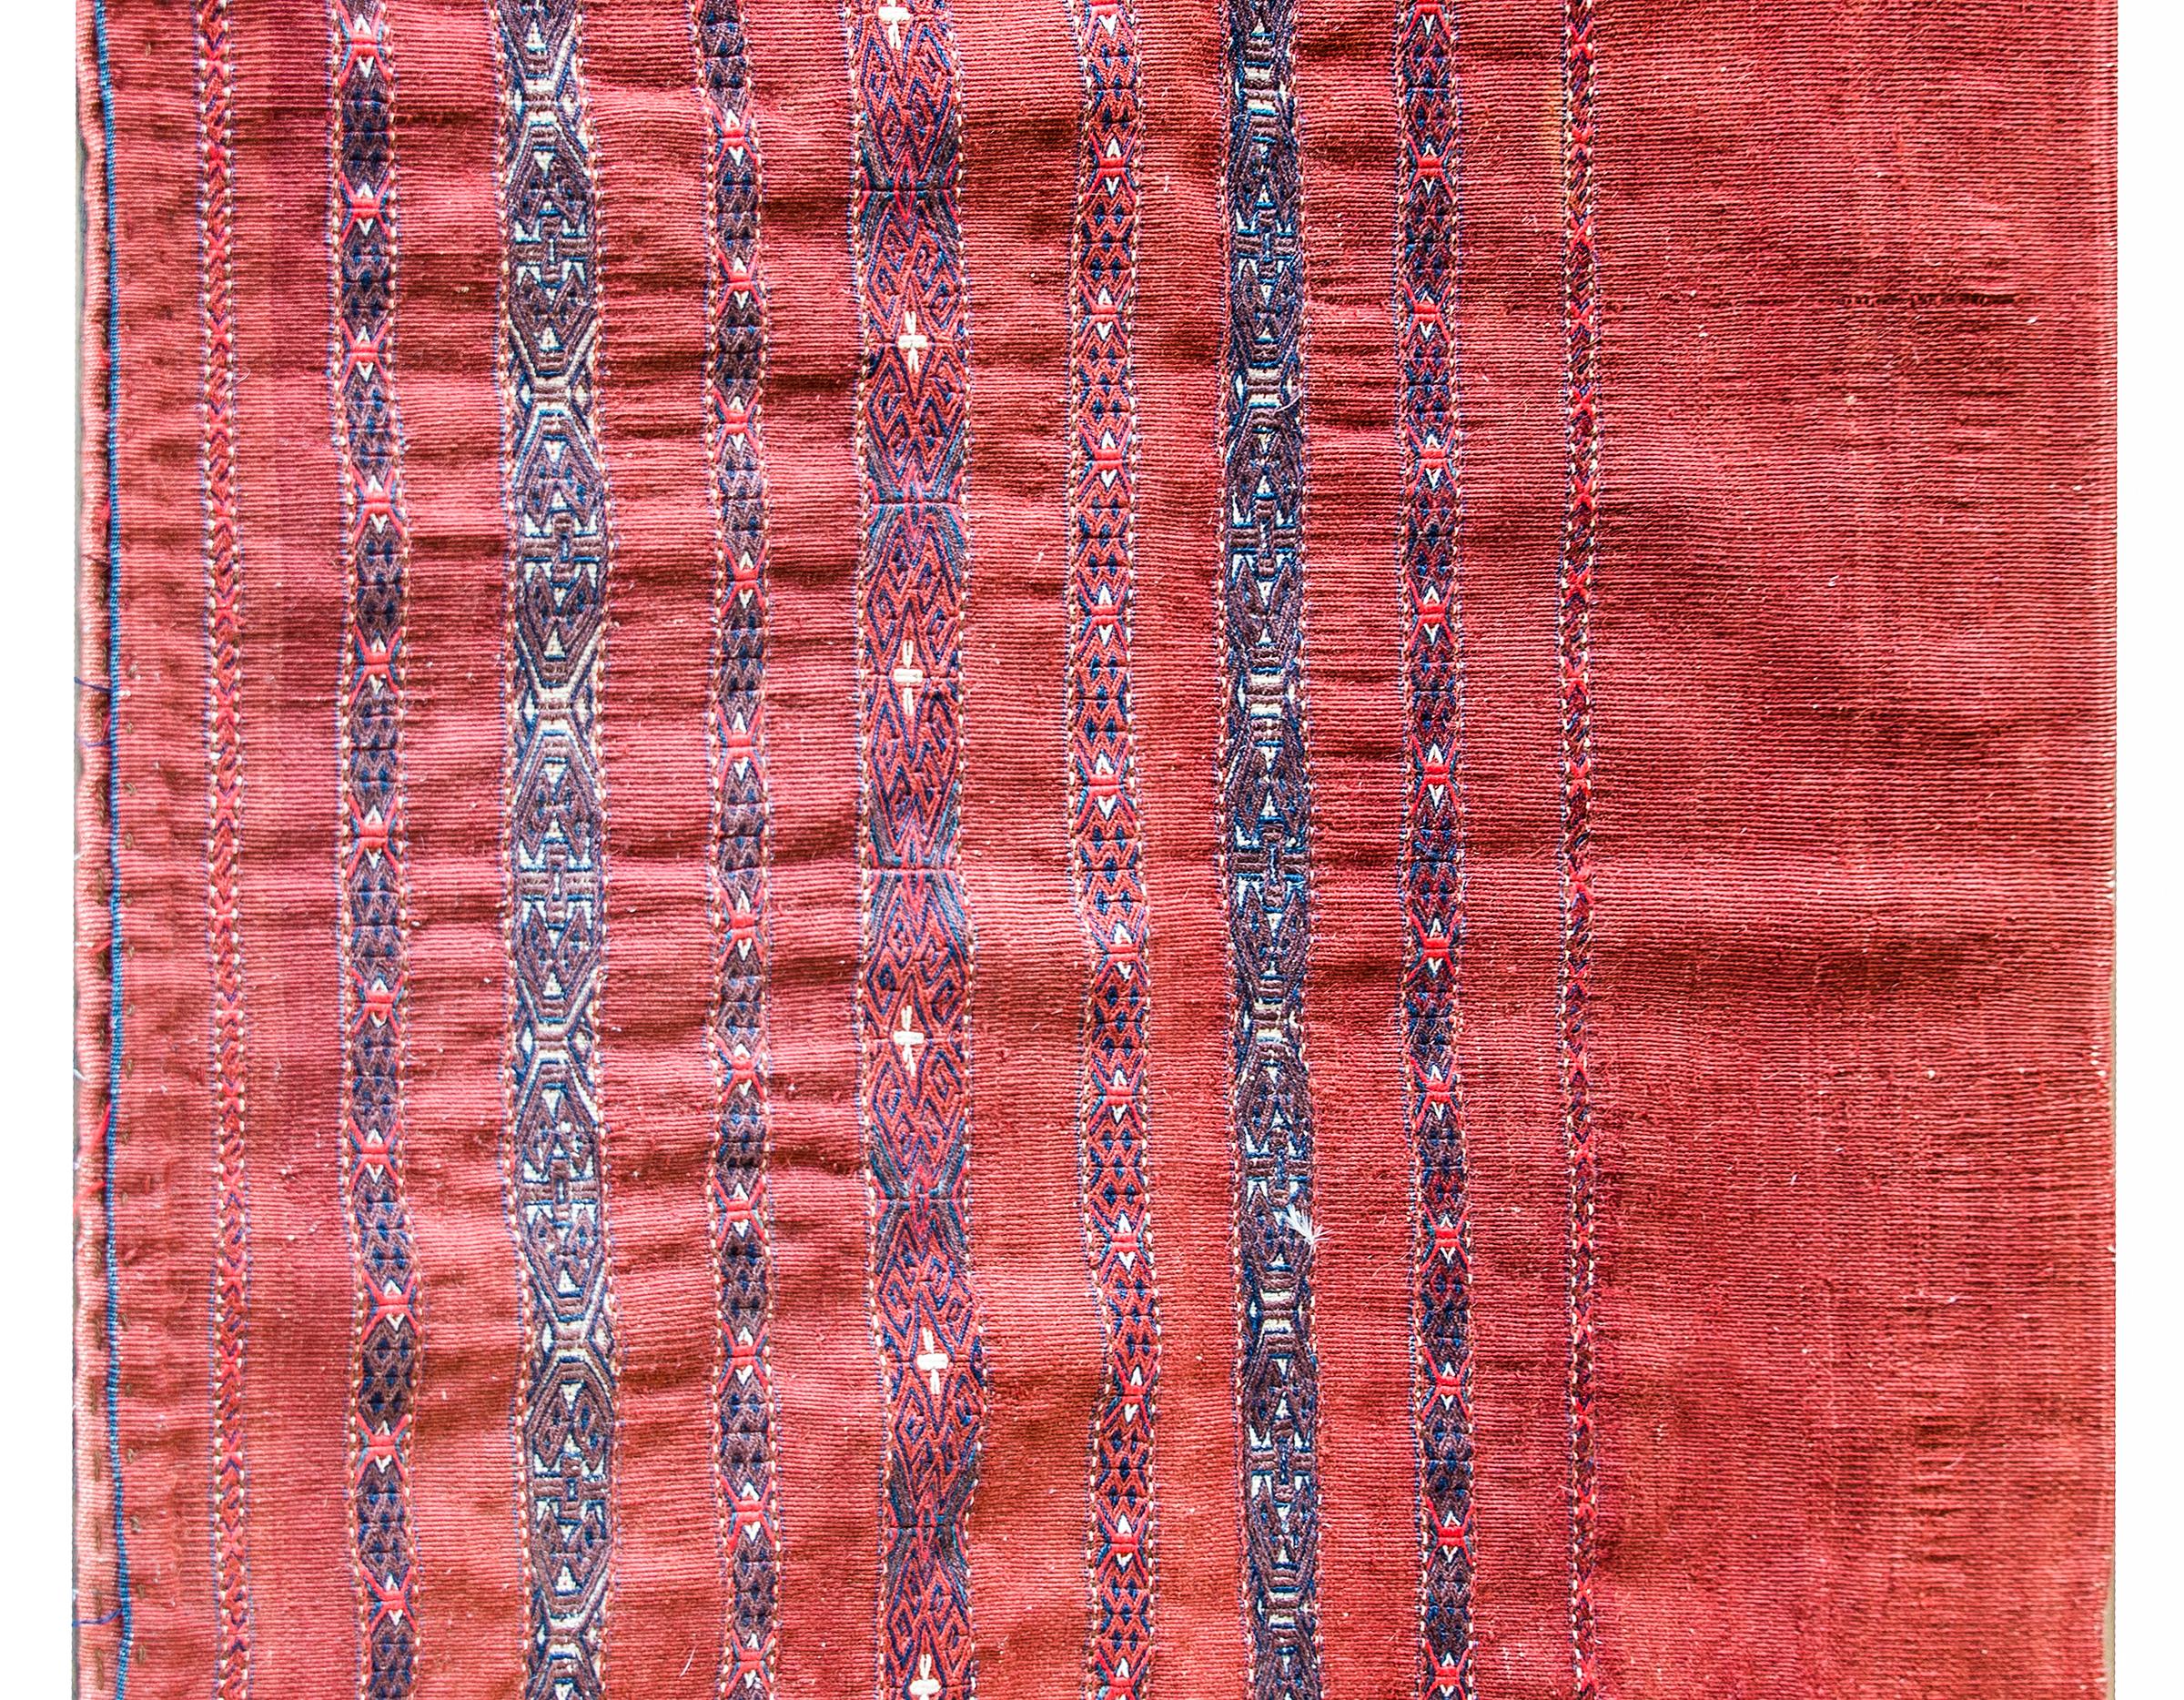 A wonderful early 20th century Persian Turkman bag face rug with a simple crimson ground with tightly woven geometric patterned stripes woven in indigo, crimson, and brown.